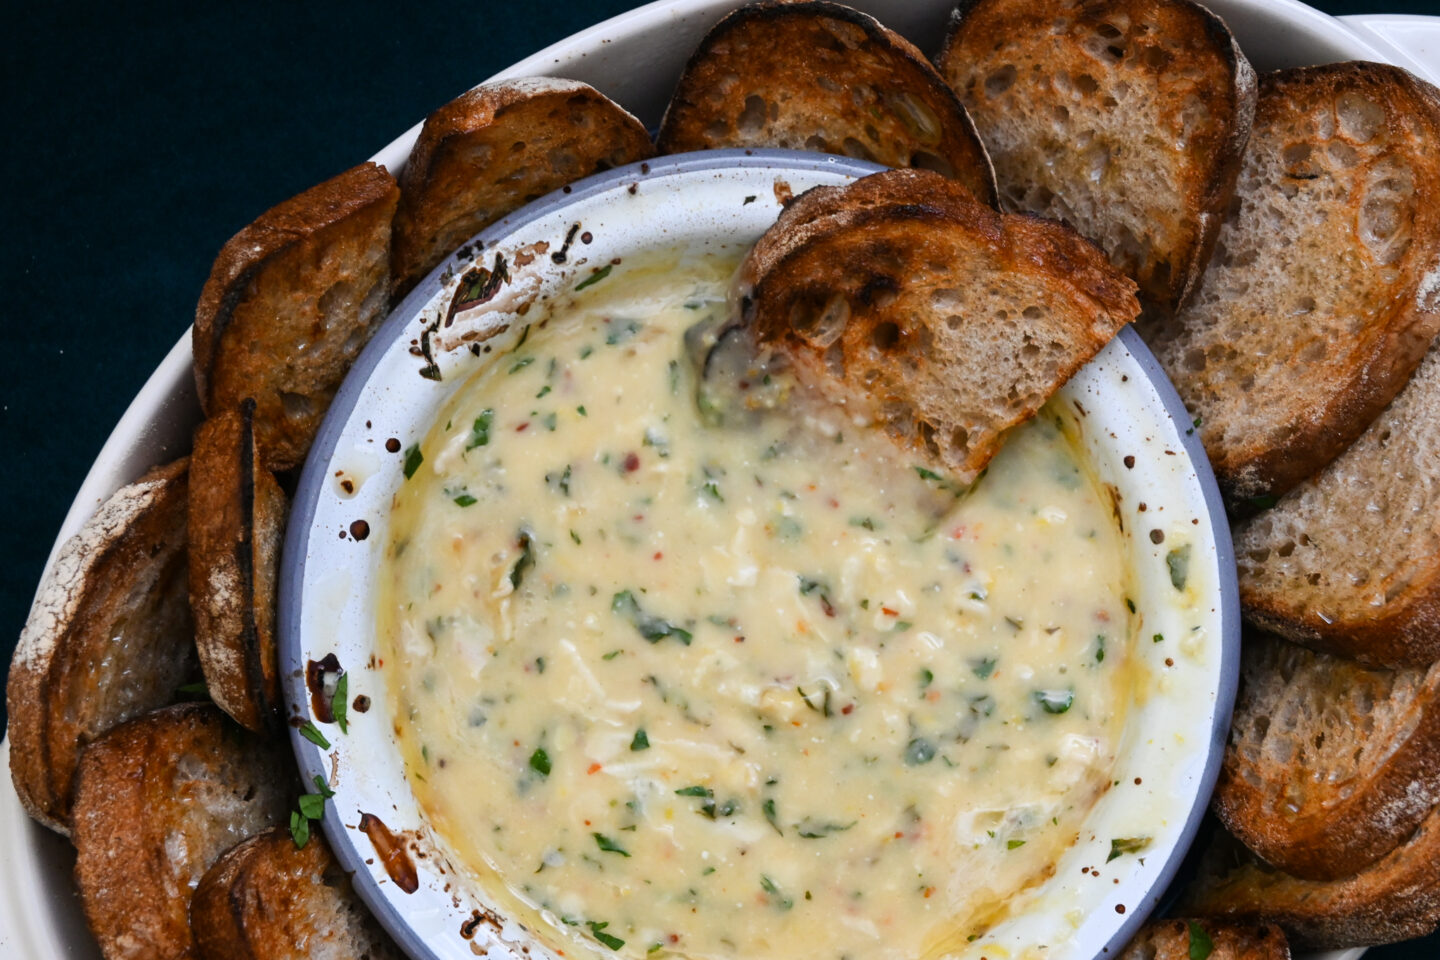 Enamel bowl with dip made from baked camembert, herbs and oil & lemon juice served with sliced bread